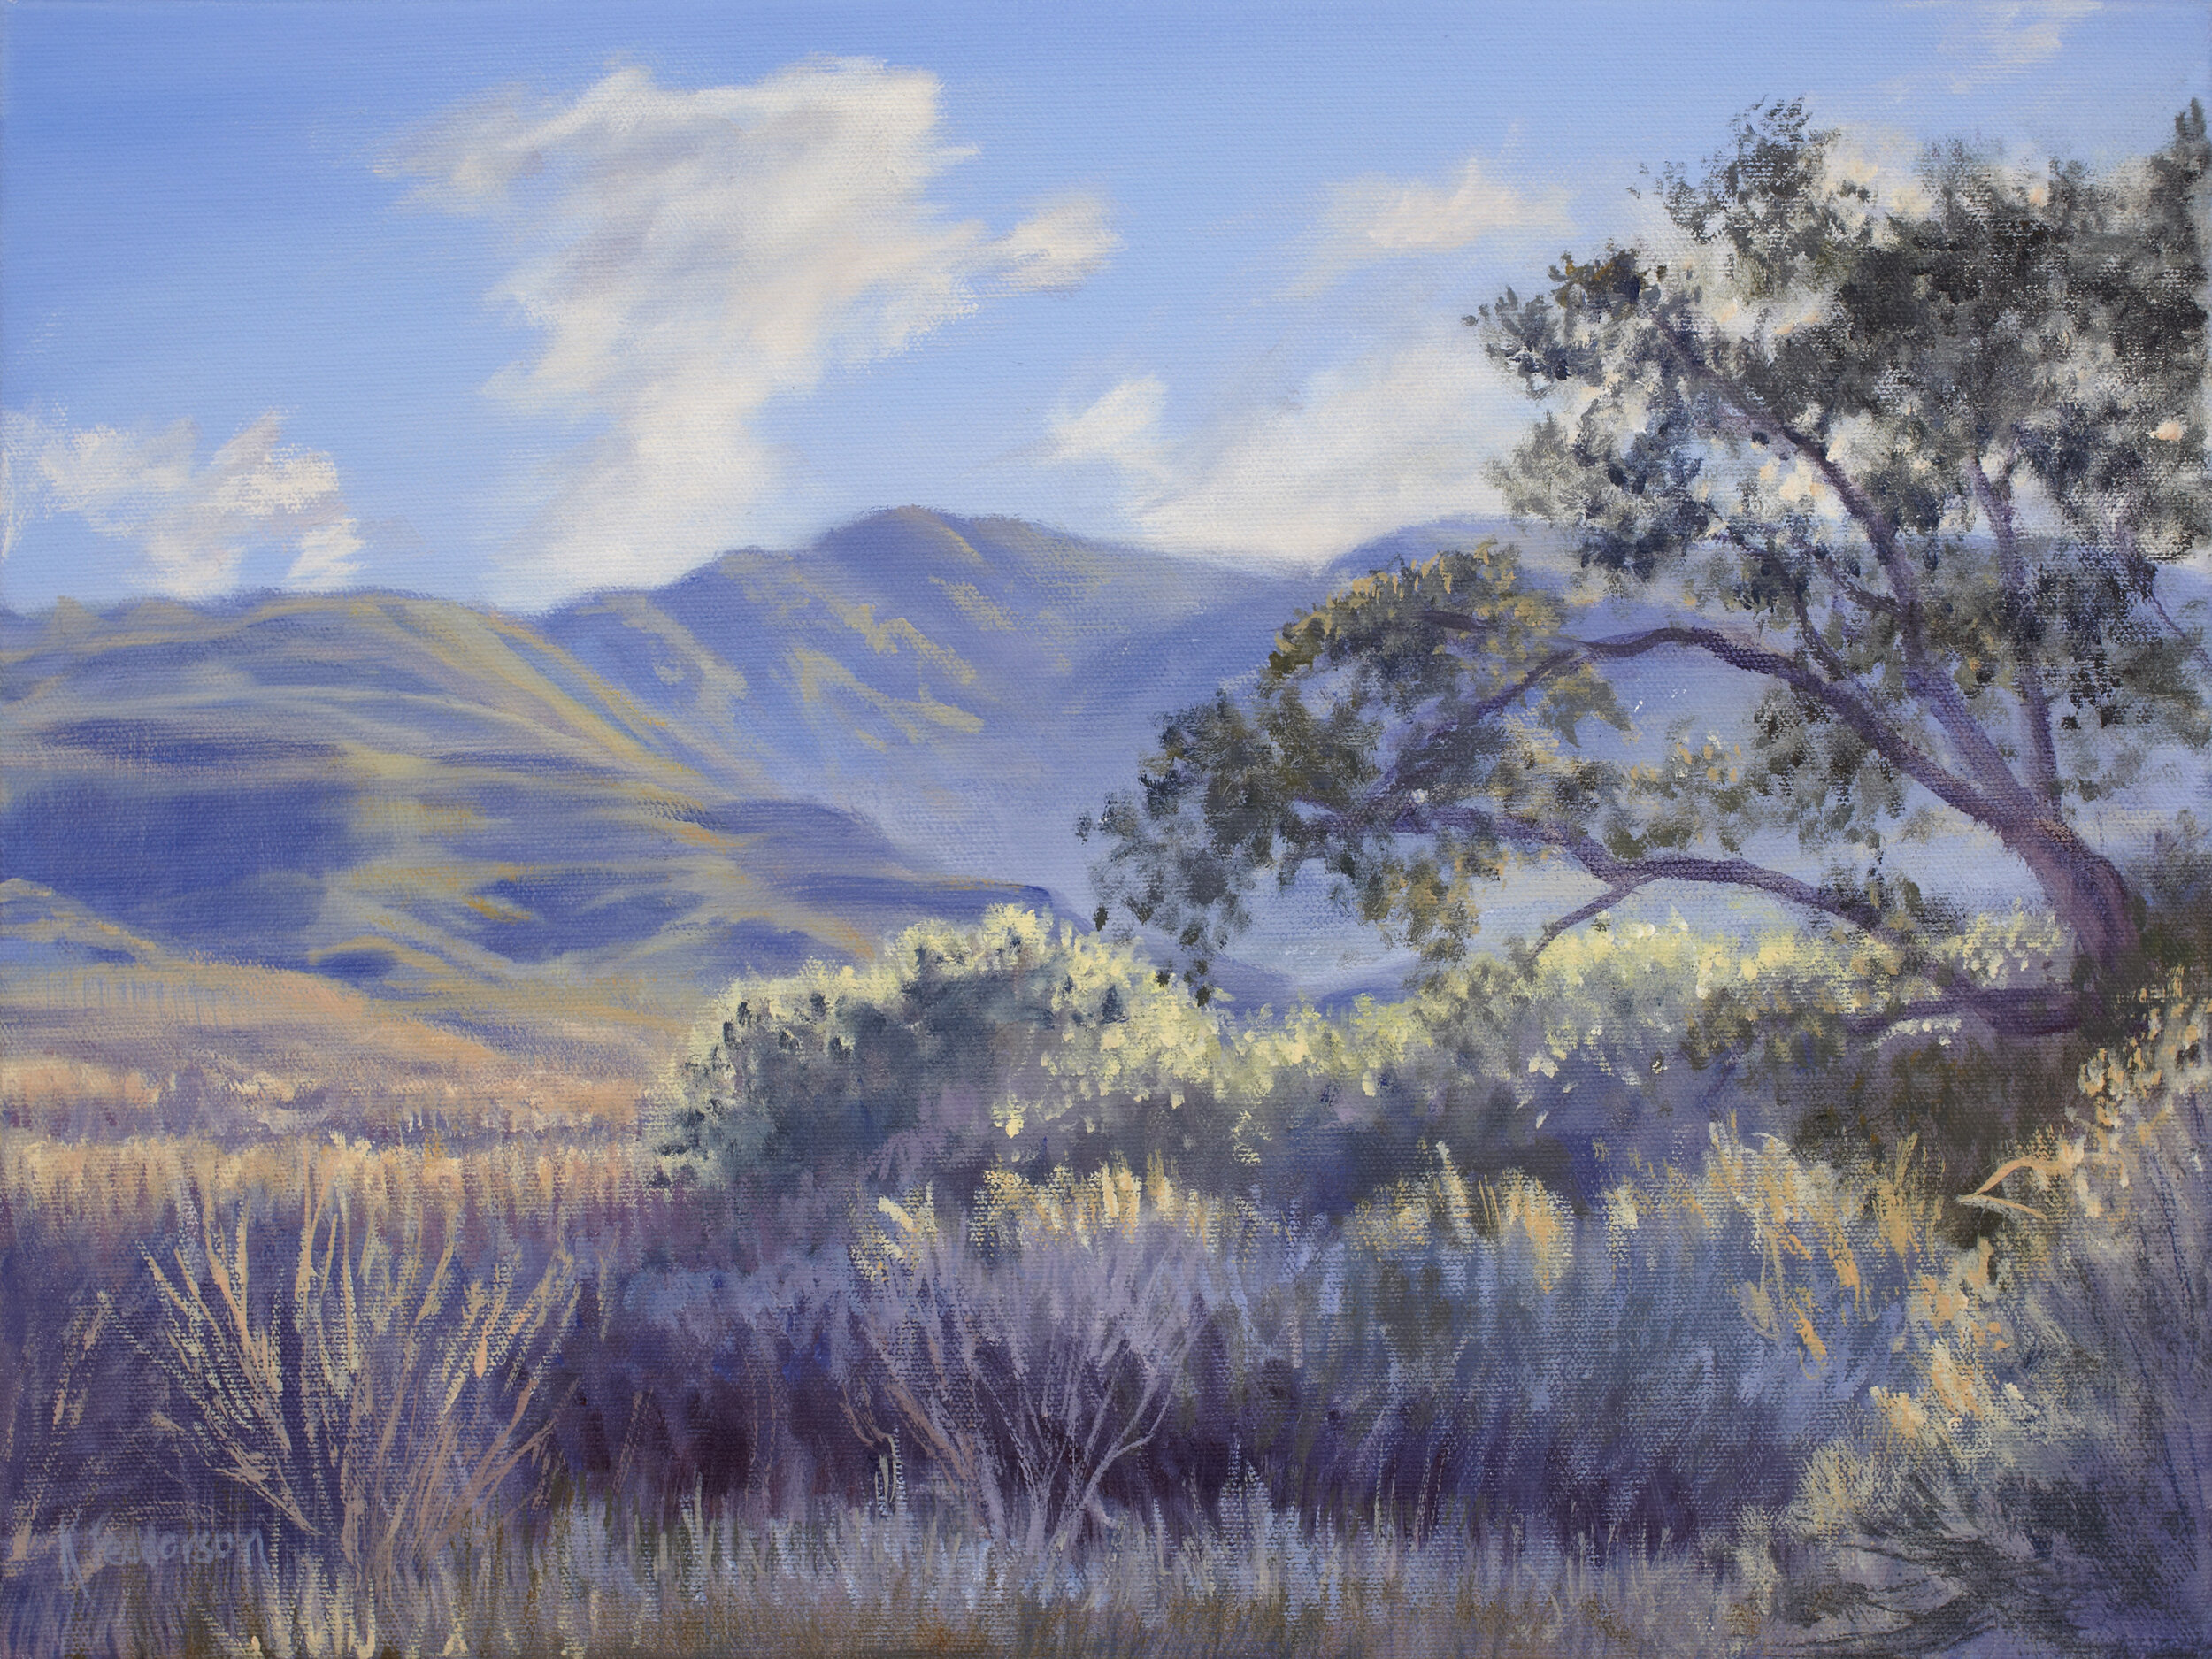 Karen Fedderson, "Sweetwater Trail Mountain View," Oil on canvas